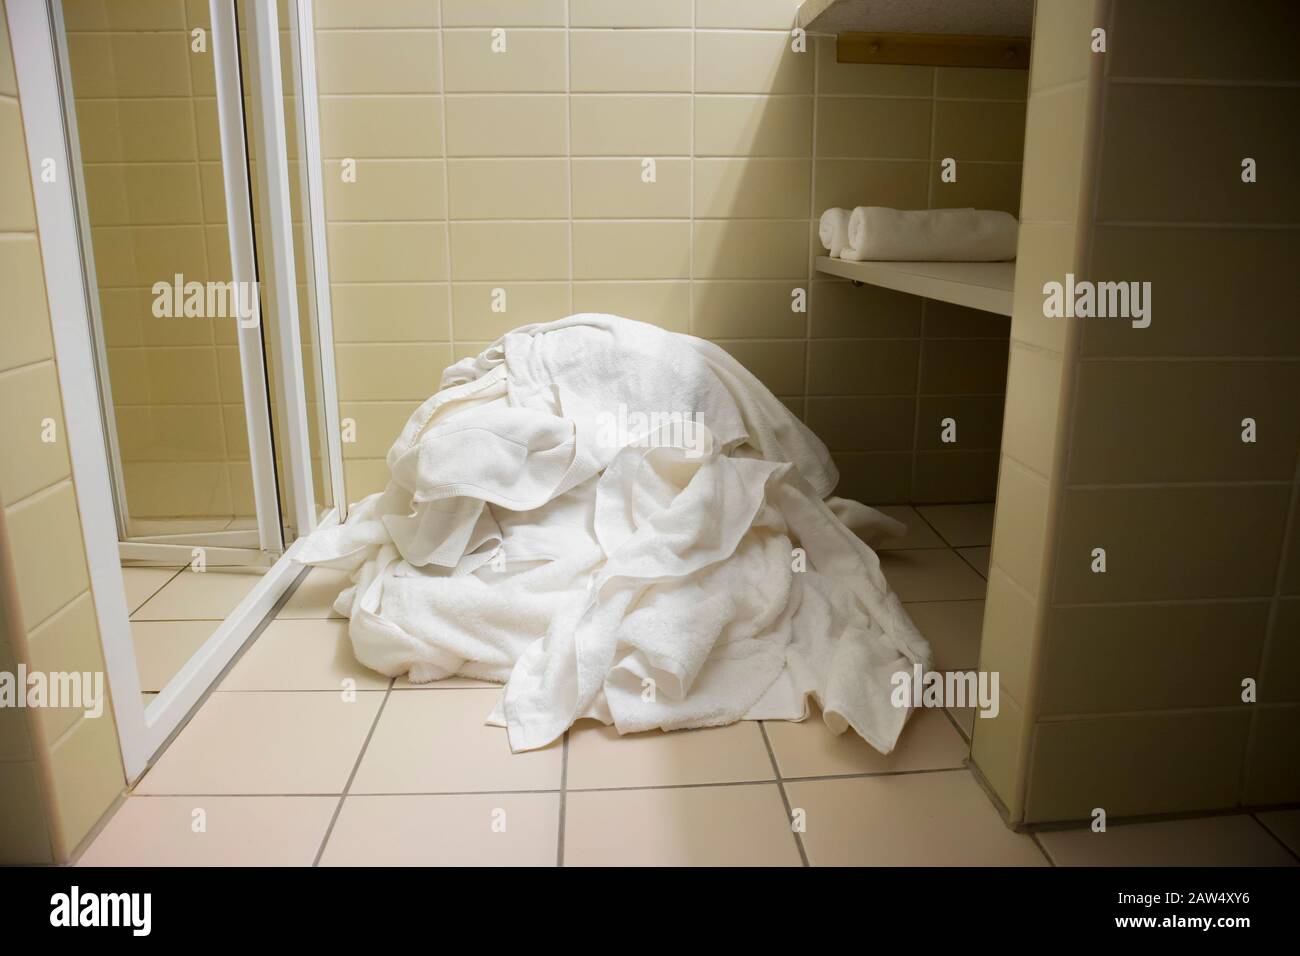 Pile of dirty used towels on the hotel bathroom floor. Housekeeping replace only the used towels on floor with clean ones. Saving water, soap, energy Stock Photo